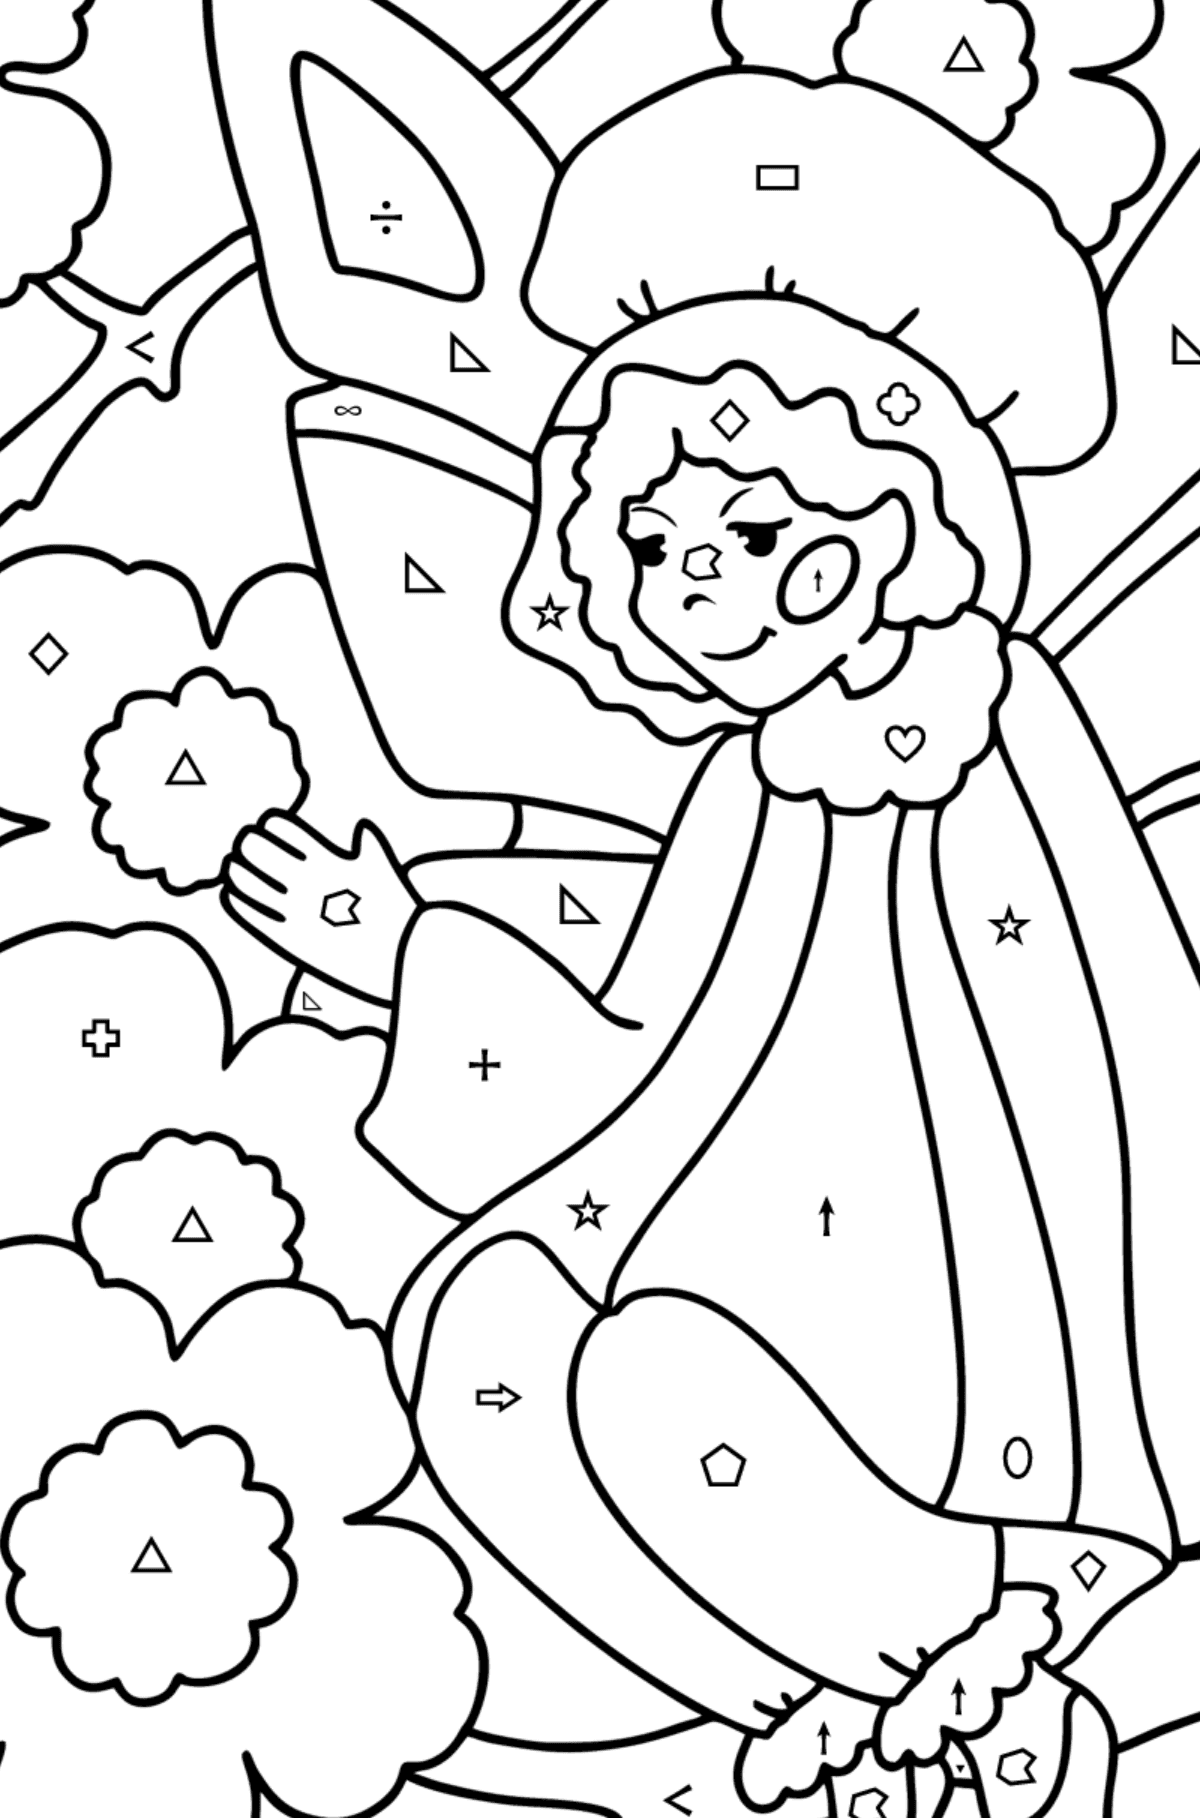 Fairy on a flower coloring page - Coloring by Symbols and Geometric Shapes for Kids